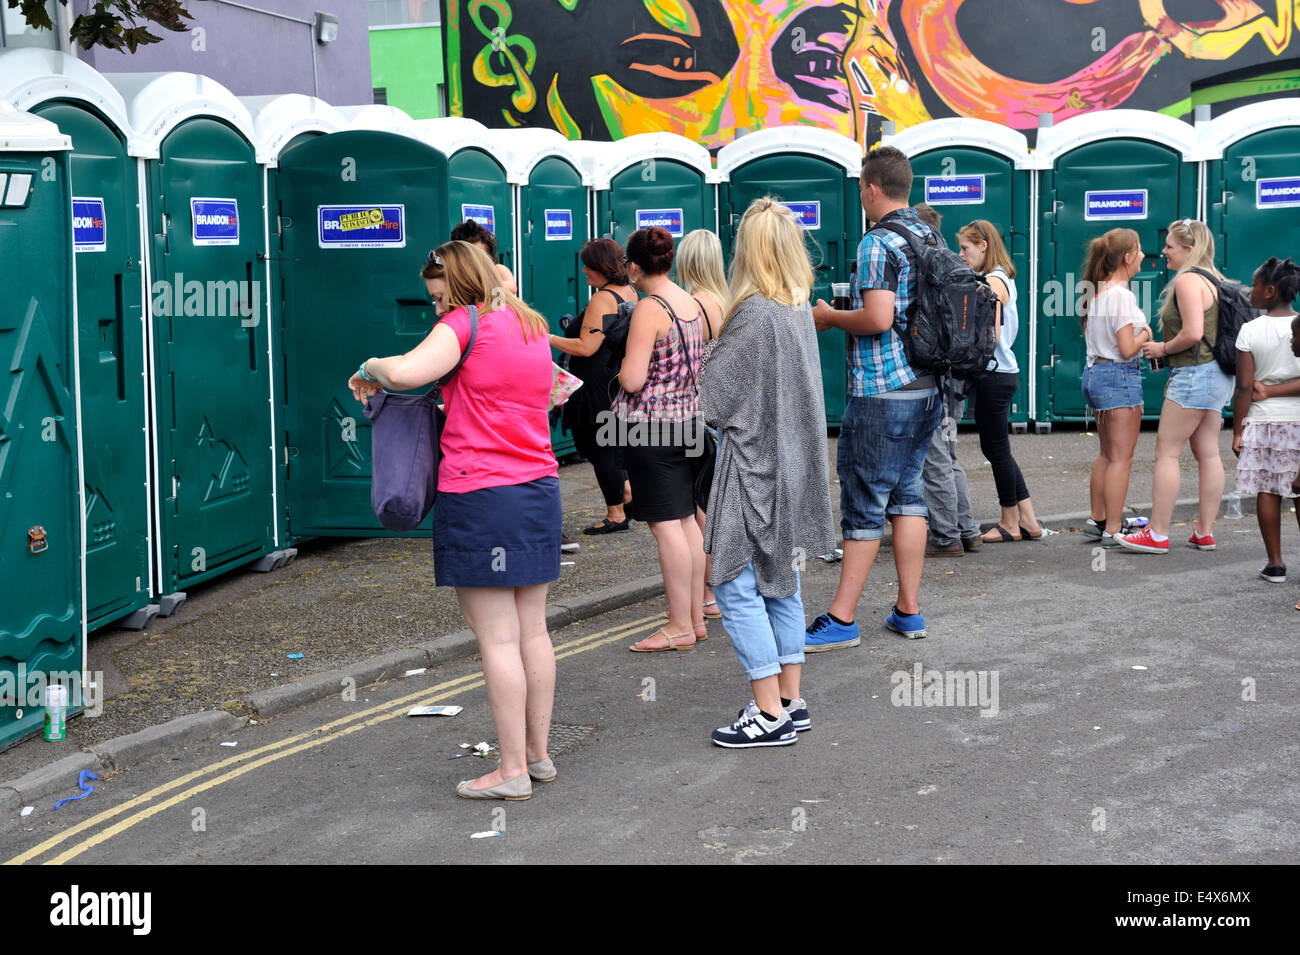 People waiting for portable toilets at street festival, UK Stock Photo